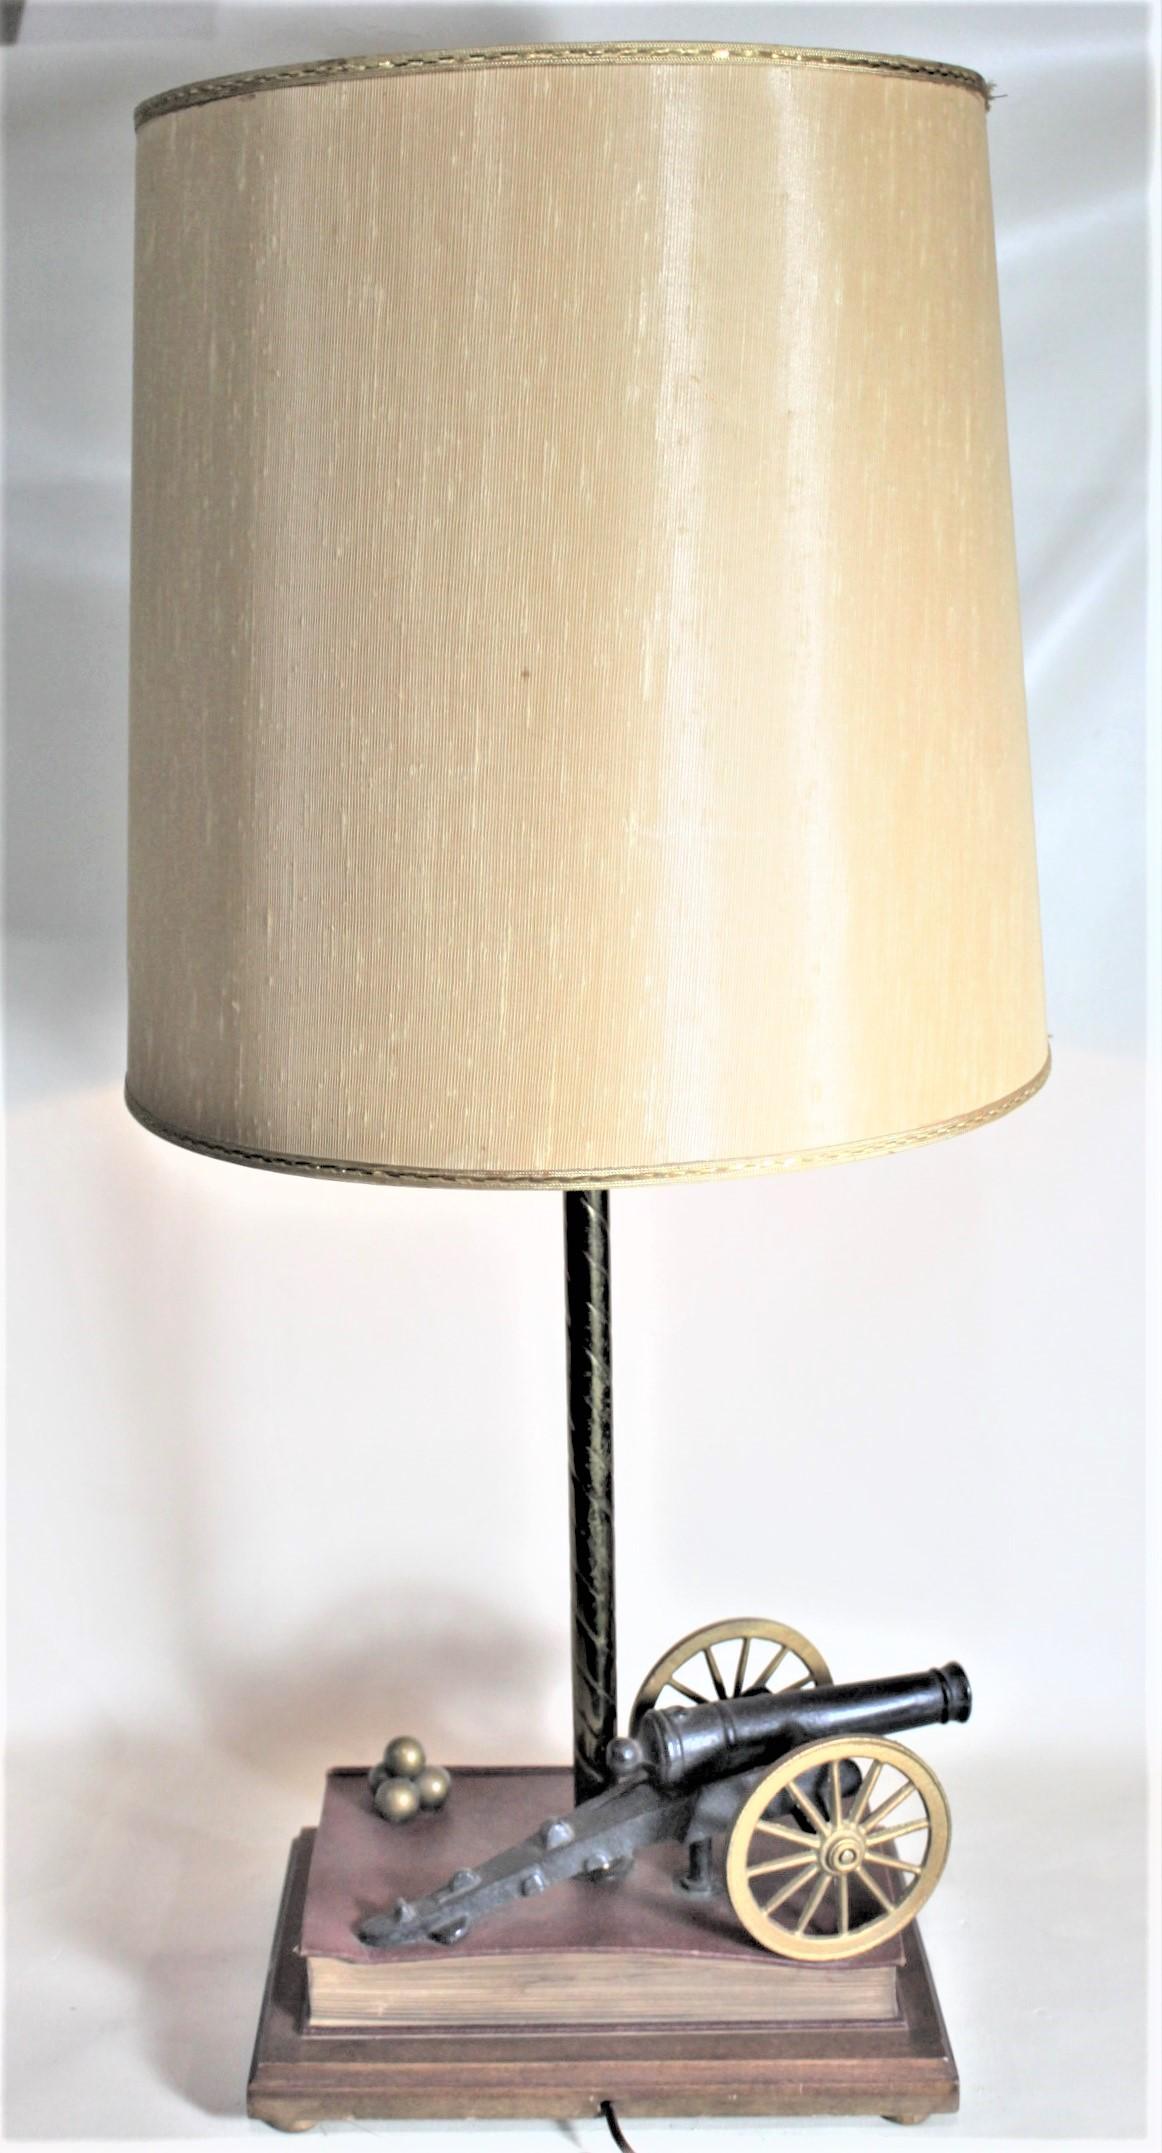 Midcentury Figural Cast Iron Canon and Leather Book Table or Desk Lamp In Good Condition For Sale In Hamilton, Ontario